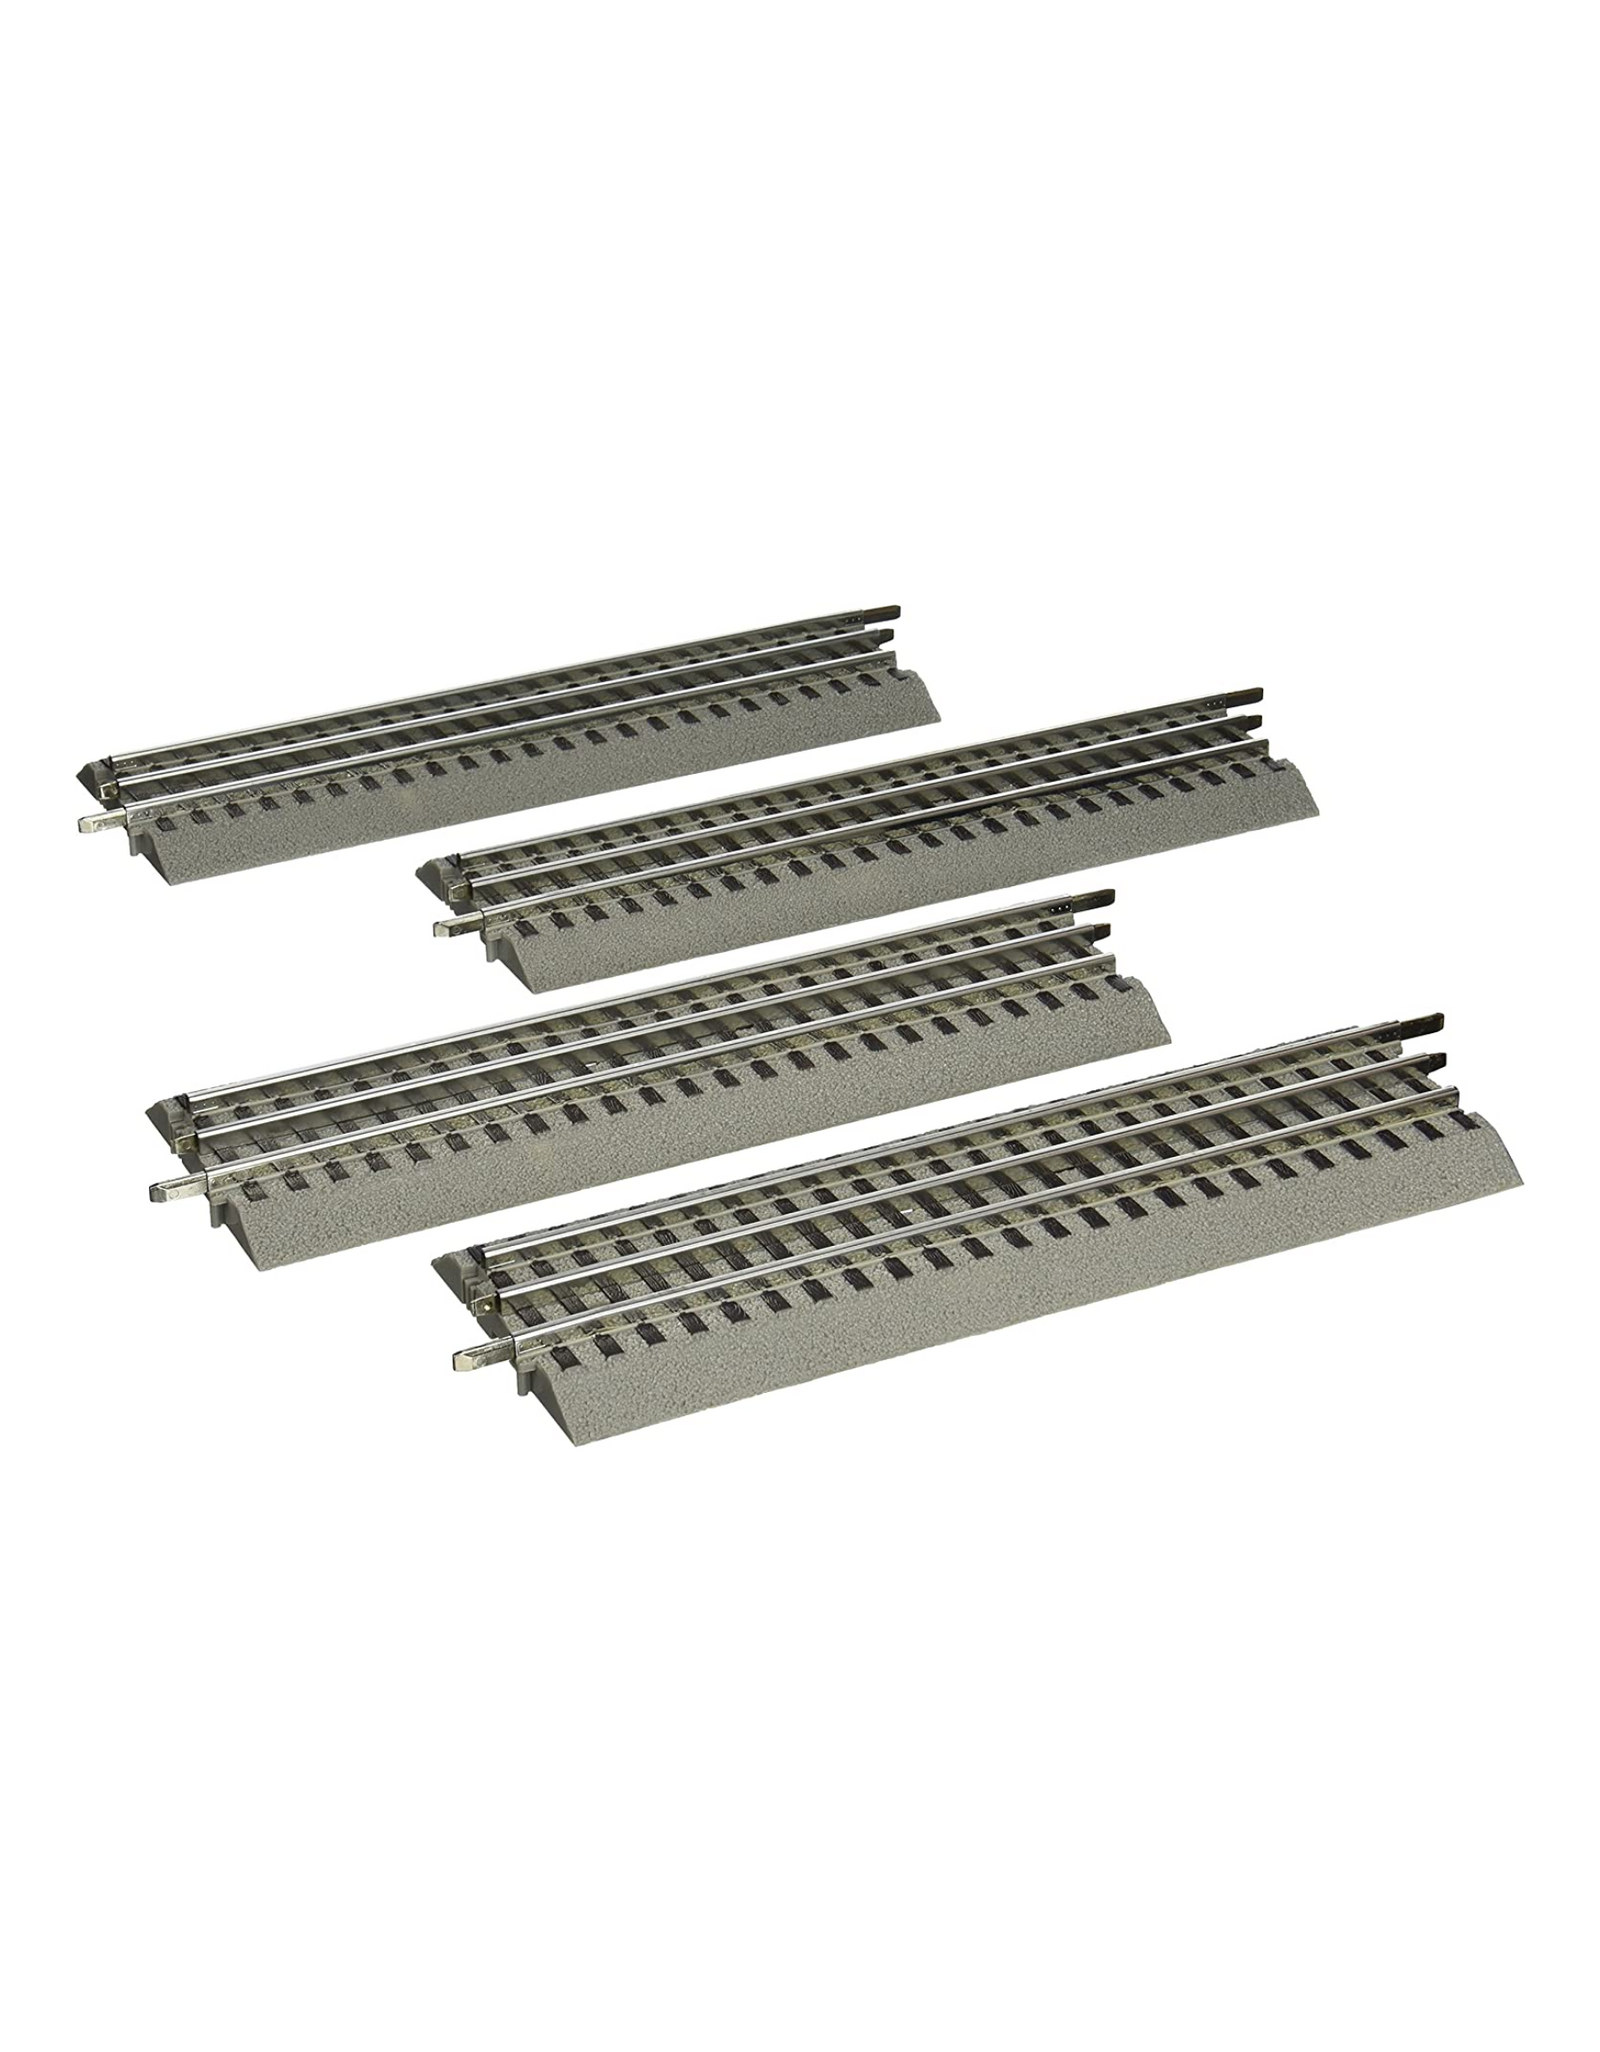 Lionel FasTrack 10 Inch Straight Track, Electric O Gauge, (4 Pack)